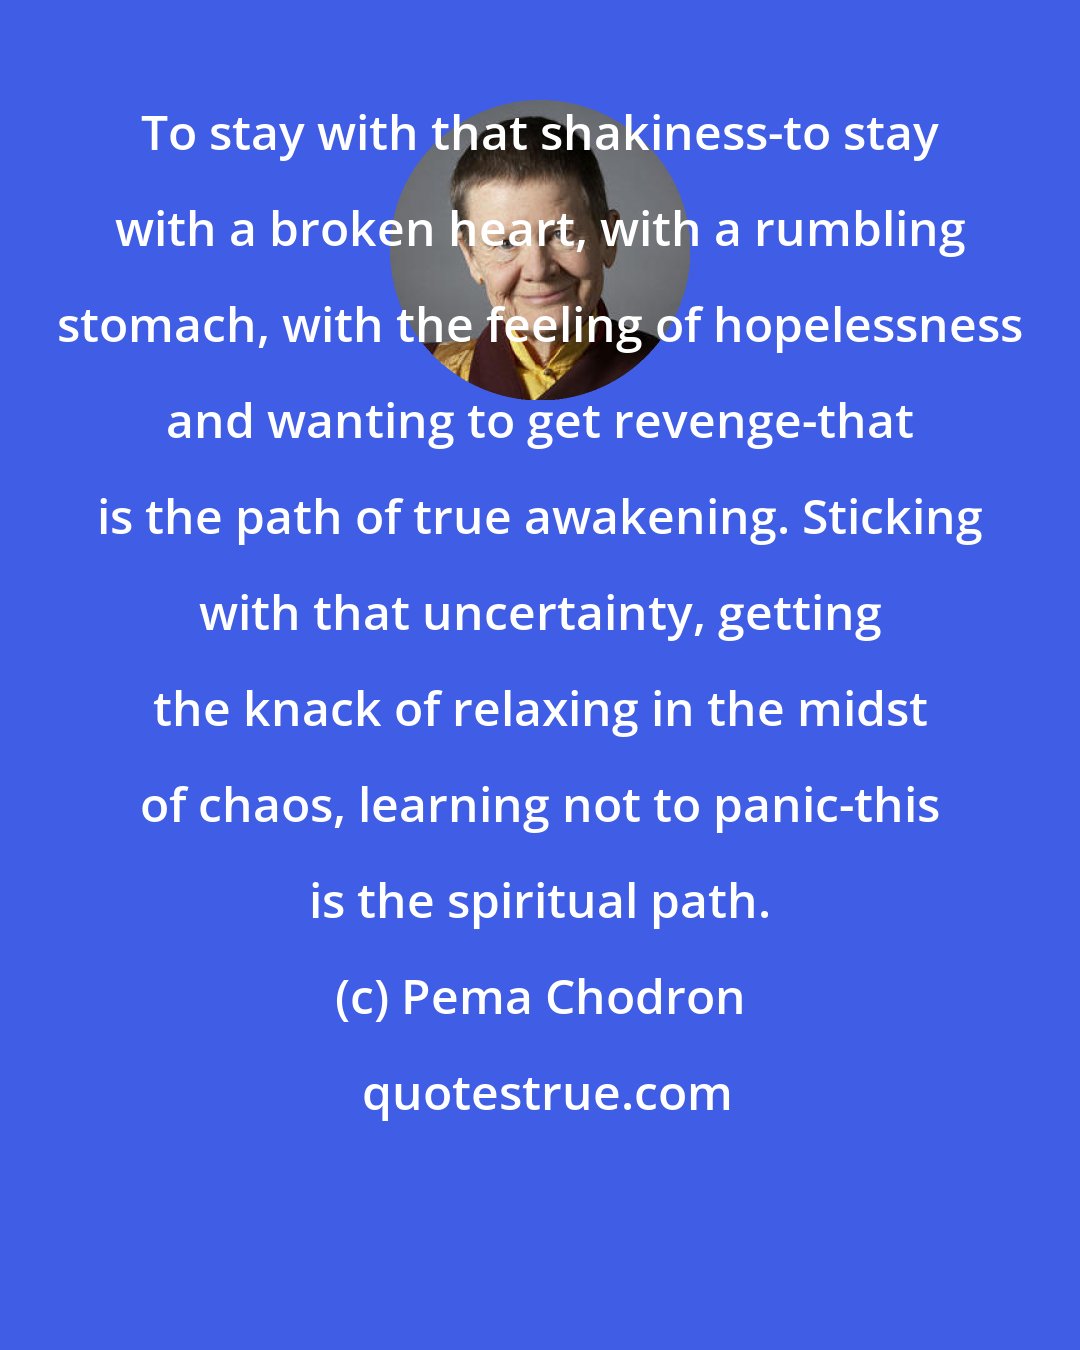 Pema Chodron: To stay with that shakiness-to stay with a broken heart, with a rumbling stomach, with the feeling of hopelessness and wanting to get revenge-that is the path of true awakening. Sticking with that uncertainty, getting the knack of relaxing in the midst of chaos, learning not to panic-this is the spiritual path.